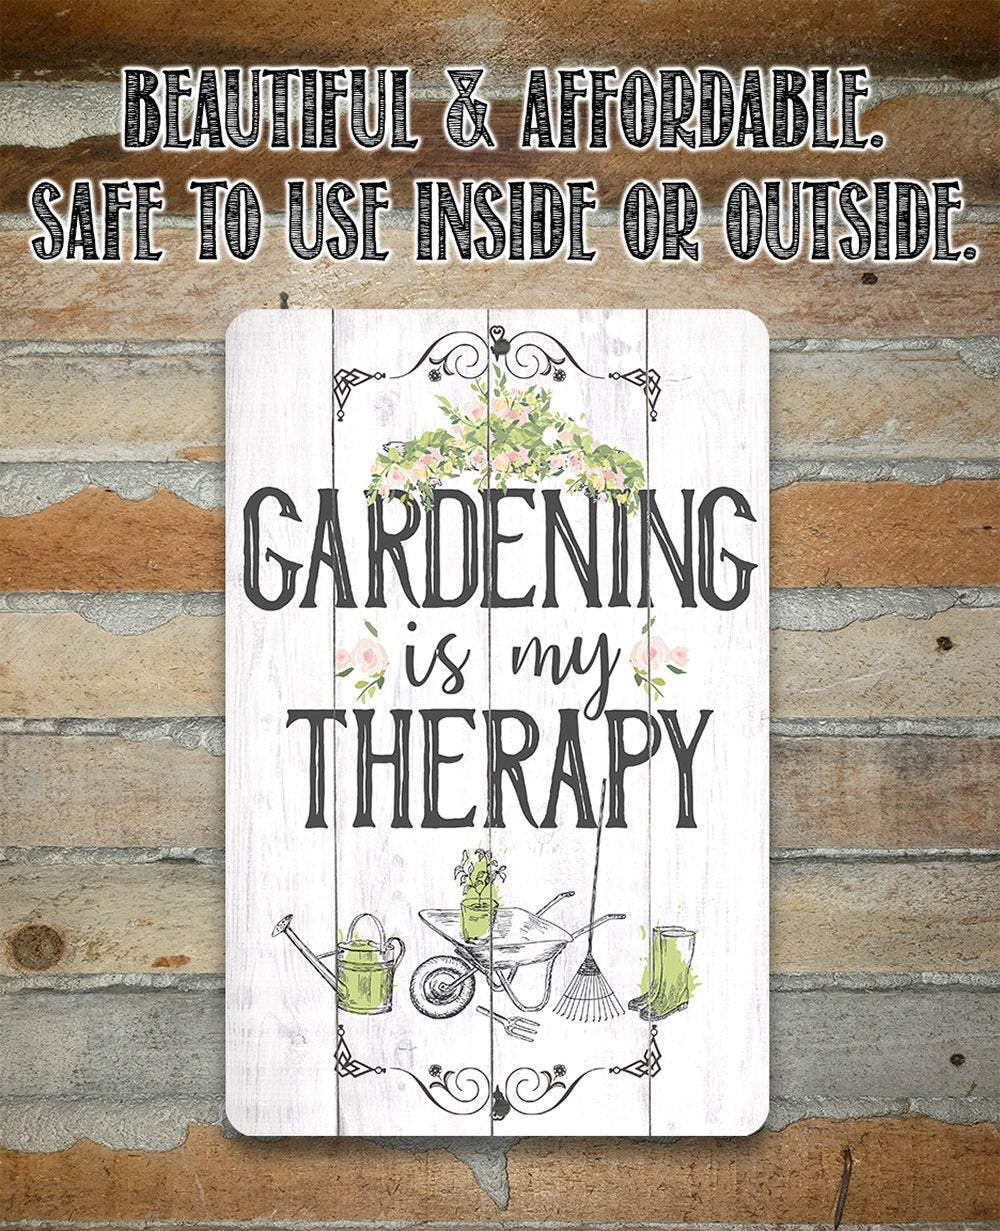 Gardening is Therapy - Metal Sign | Lone Star Art.